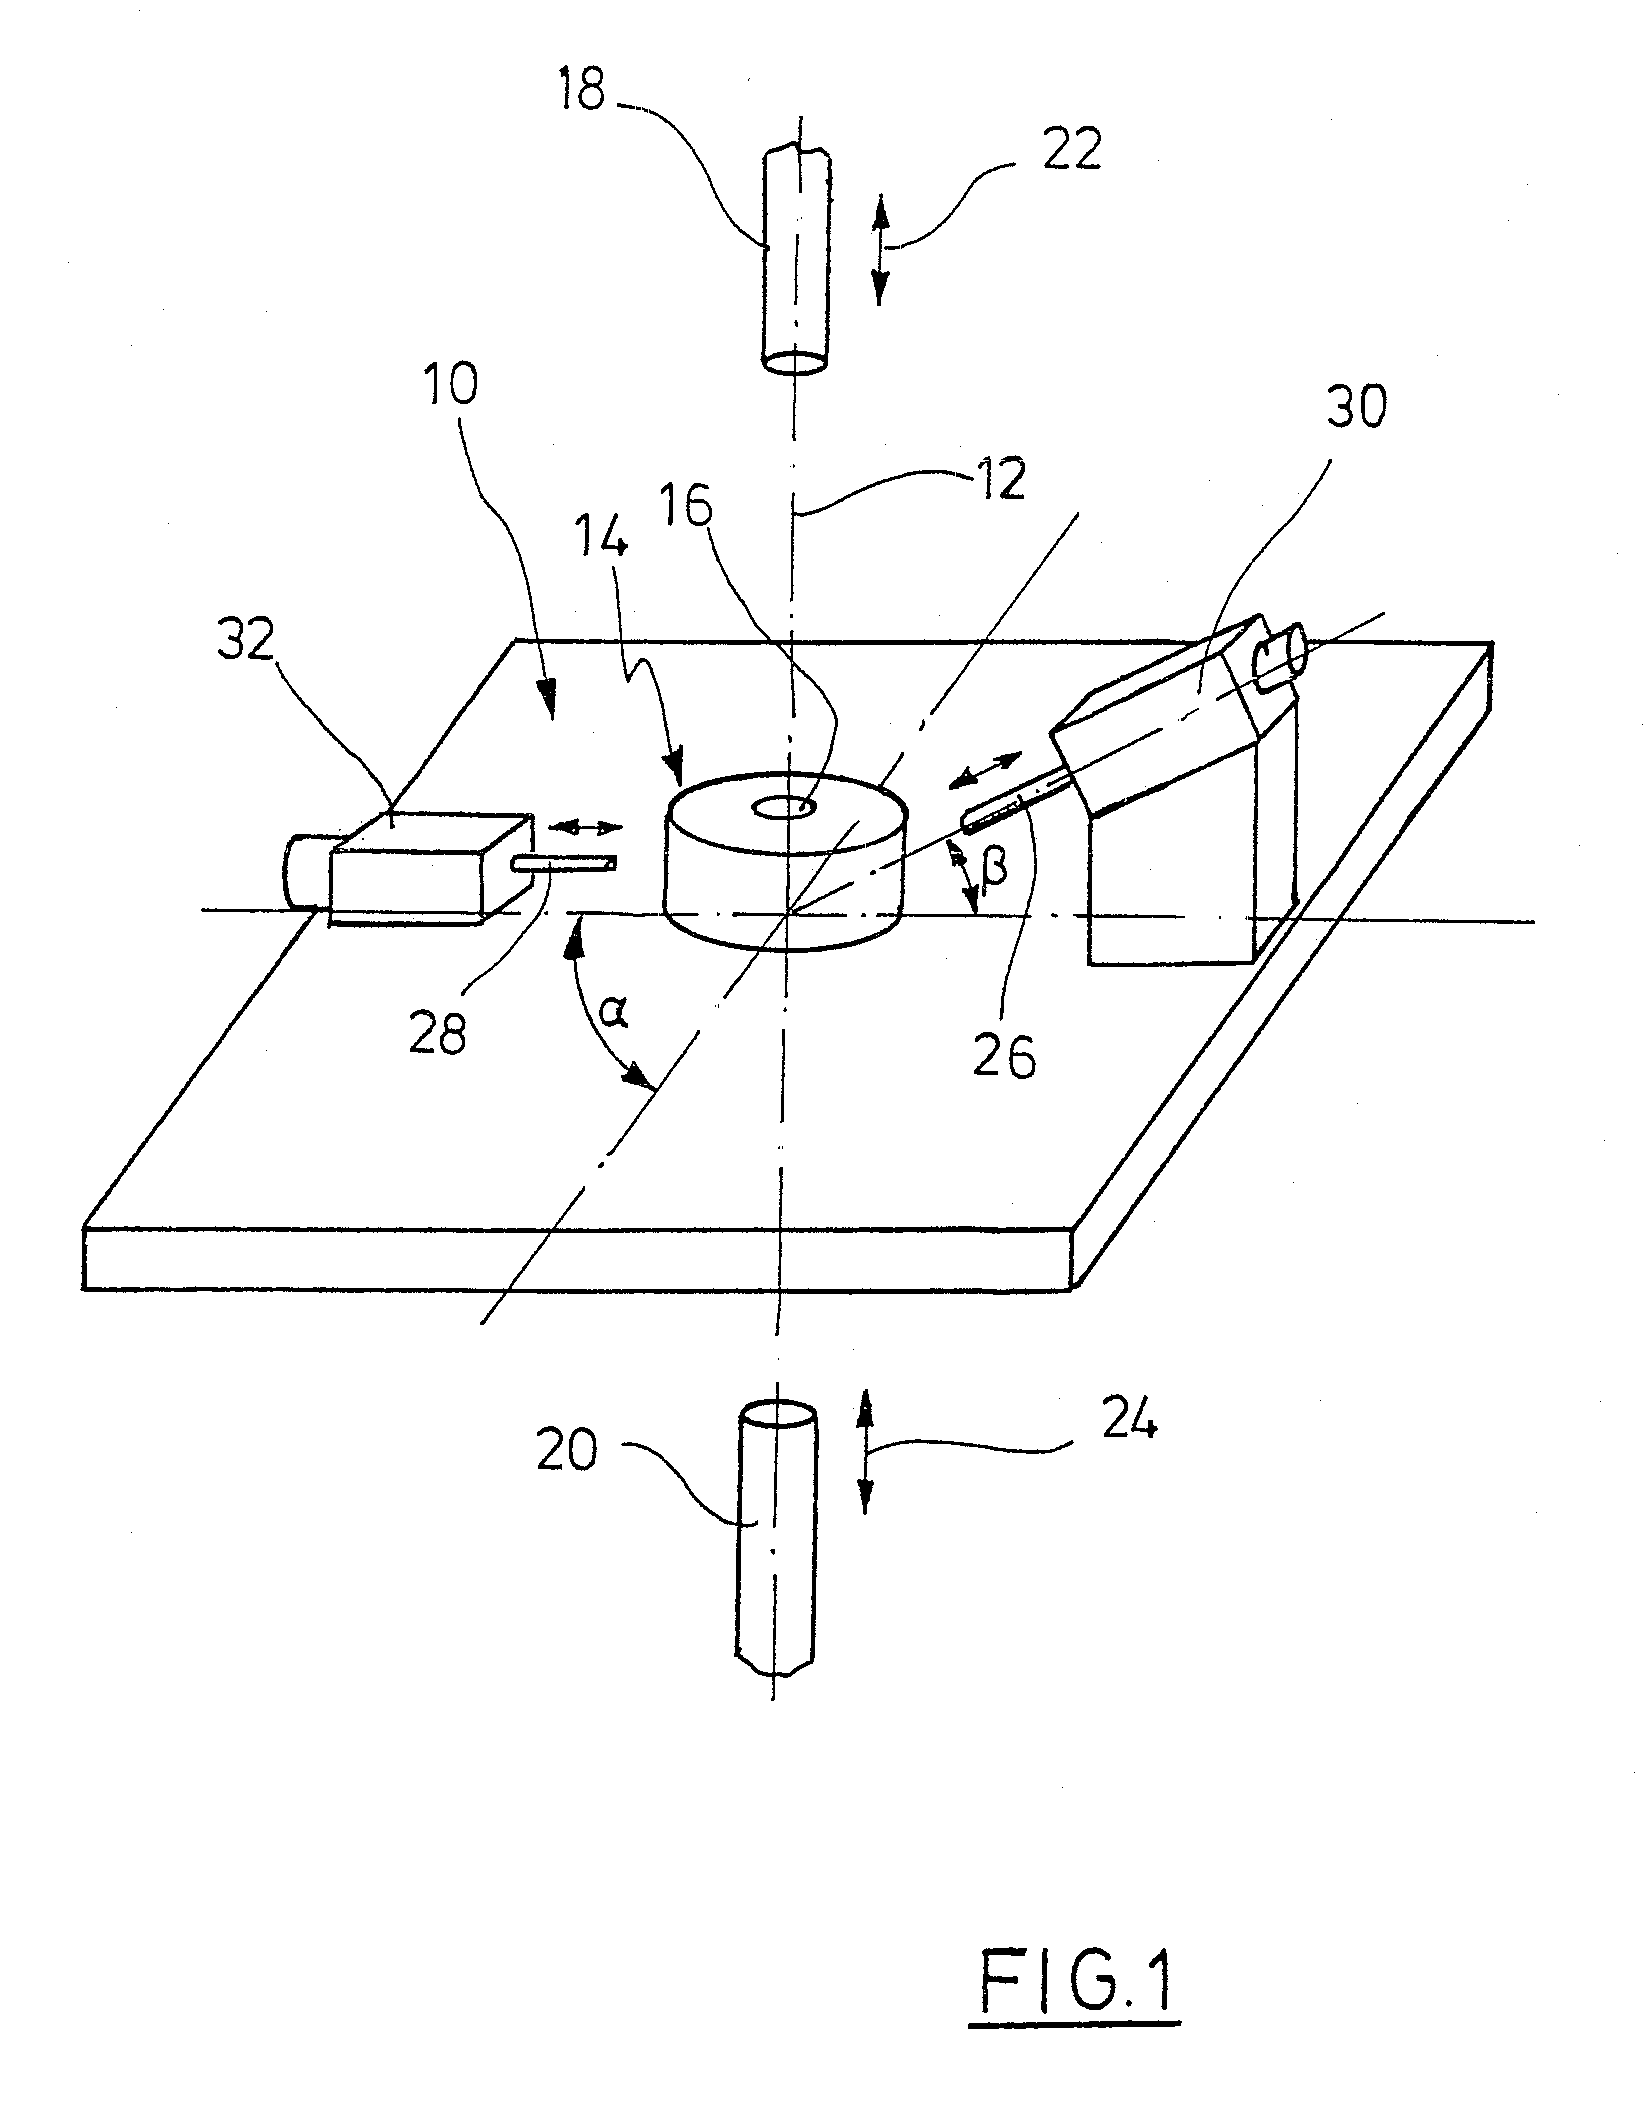 Press for producing pressed parts from powdered material